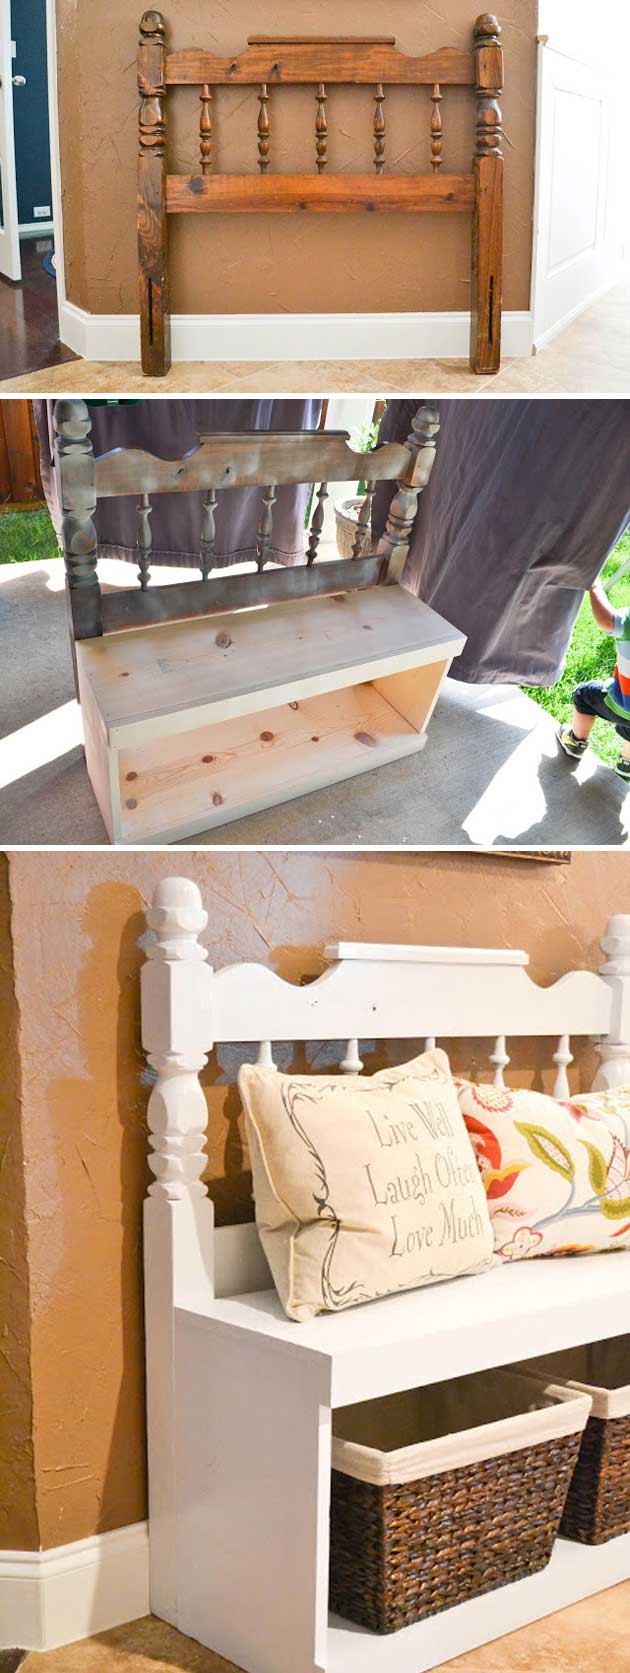 Entryway bench made from an old headboard and some boards. 